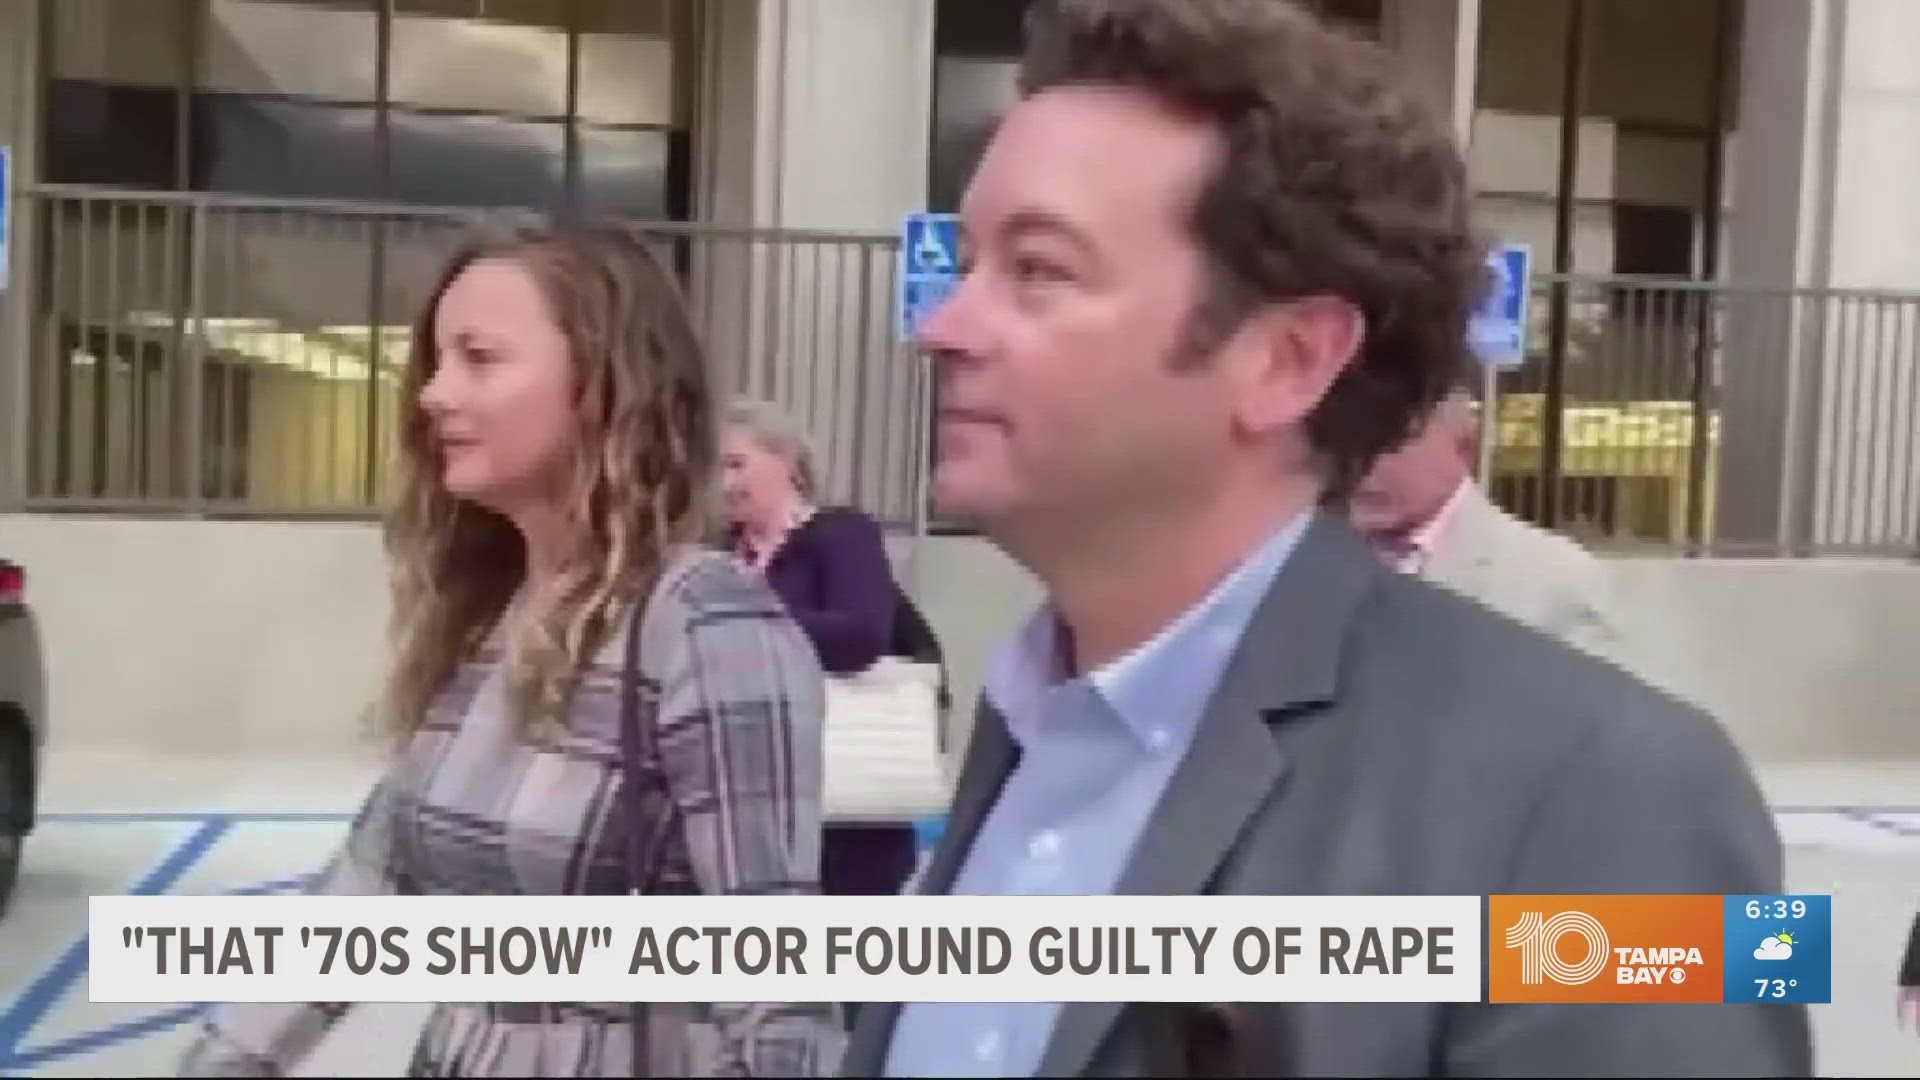 The women who accused Masterson said the Church of Scientology told them not to report the rape to police.